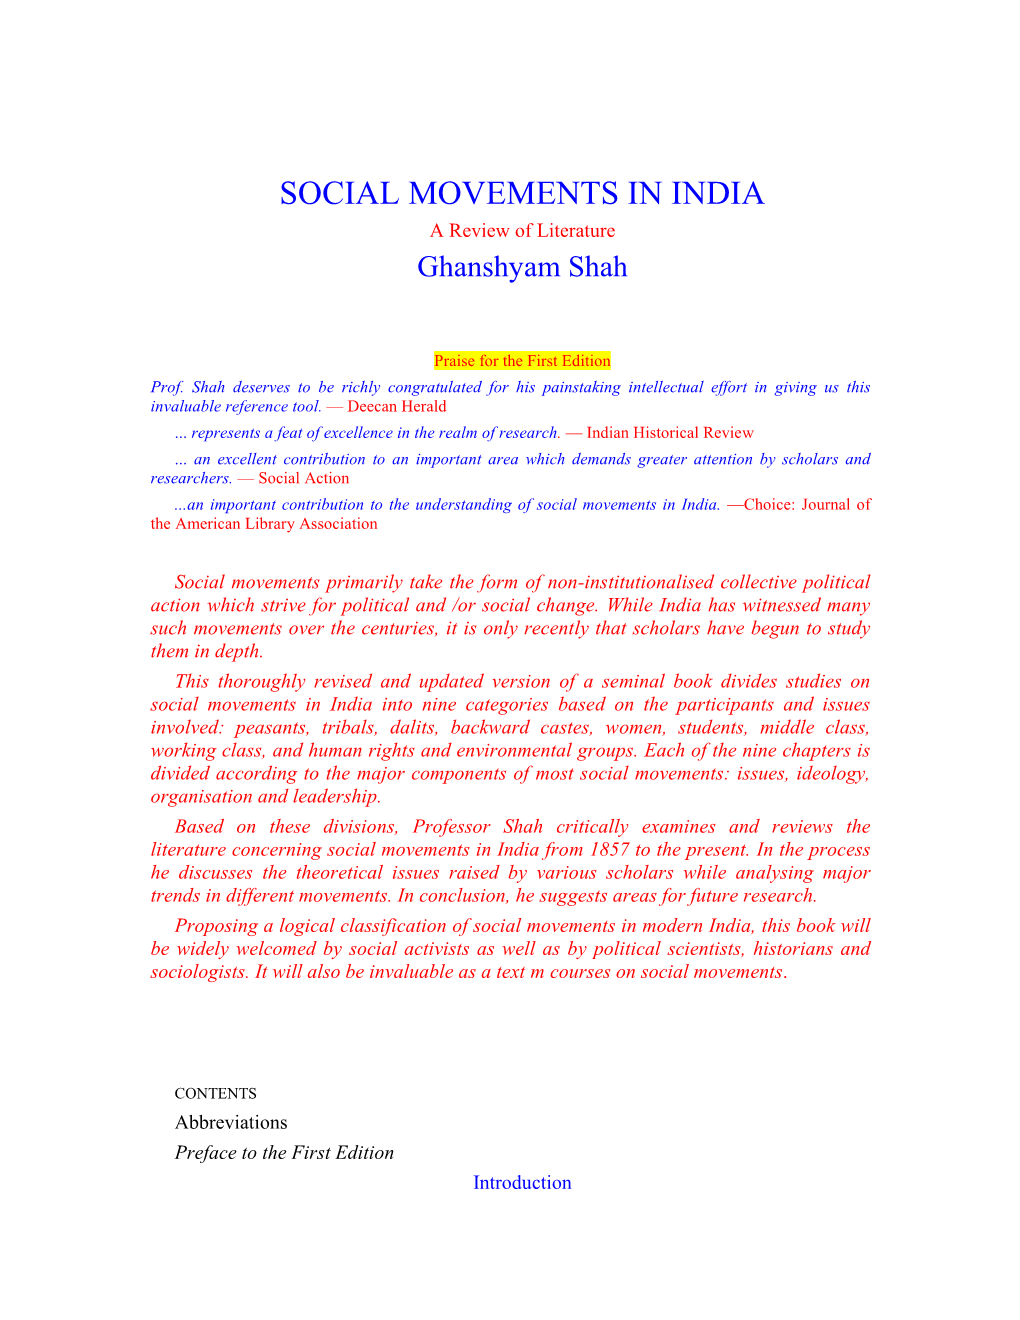 SOCIAL MOVEMENTS in INDIA a Review of Literature Ghanshyam Shah